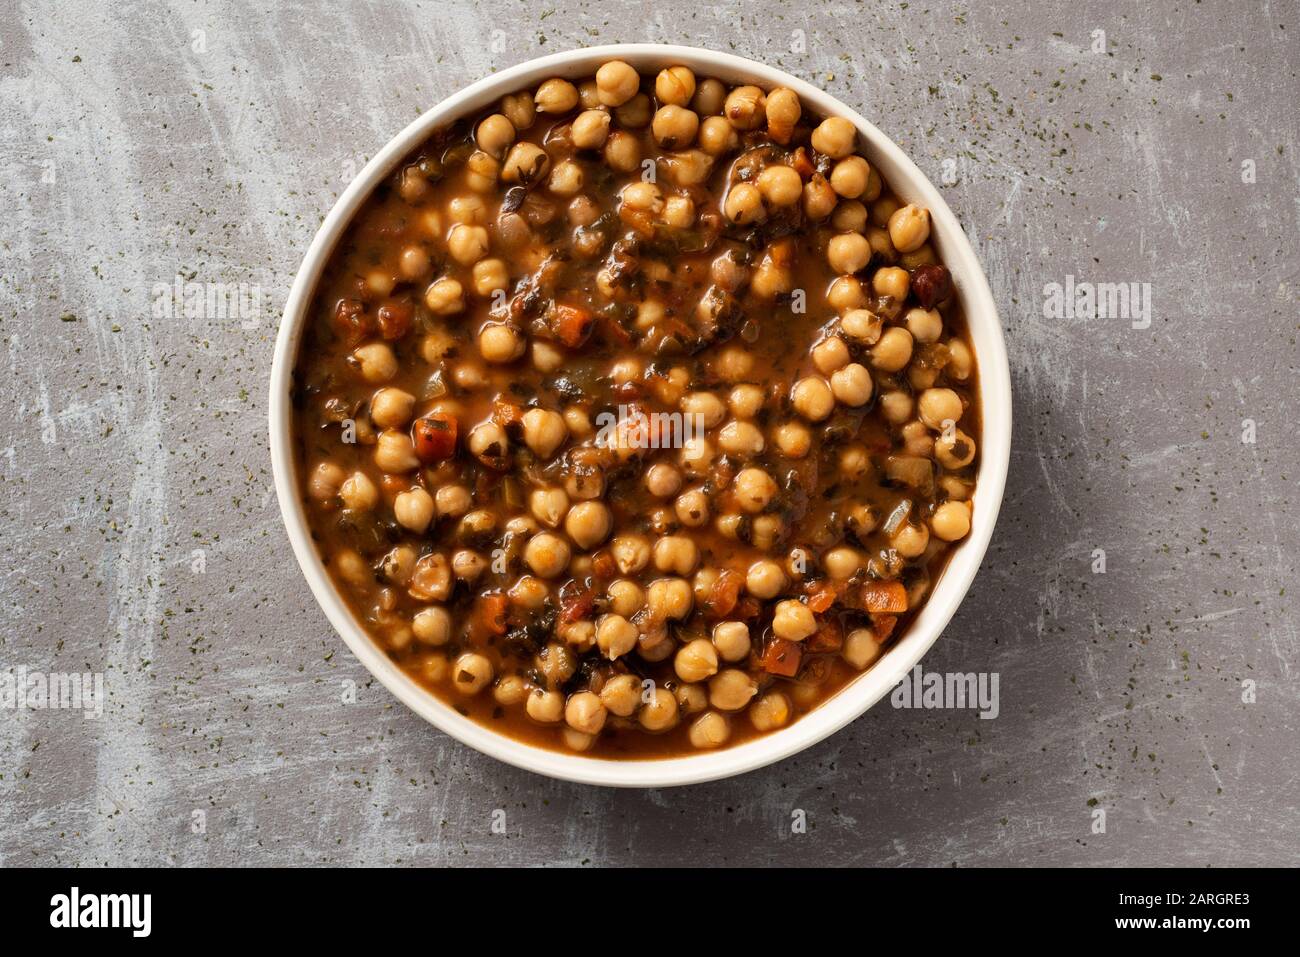 high angle view of a plate with a vegetarian chickpea stew with kombu seaweed, on a rustic gray surface Stock Photo